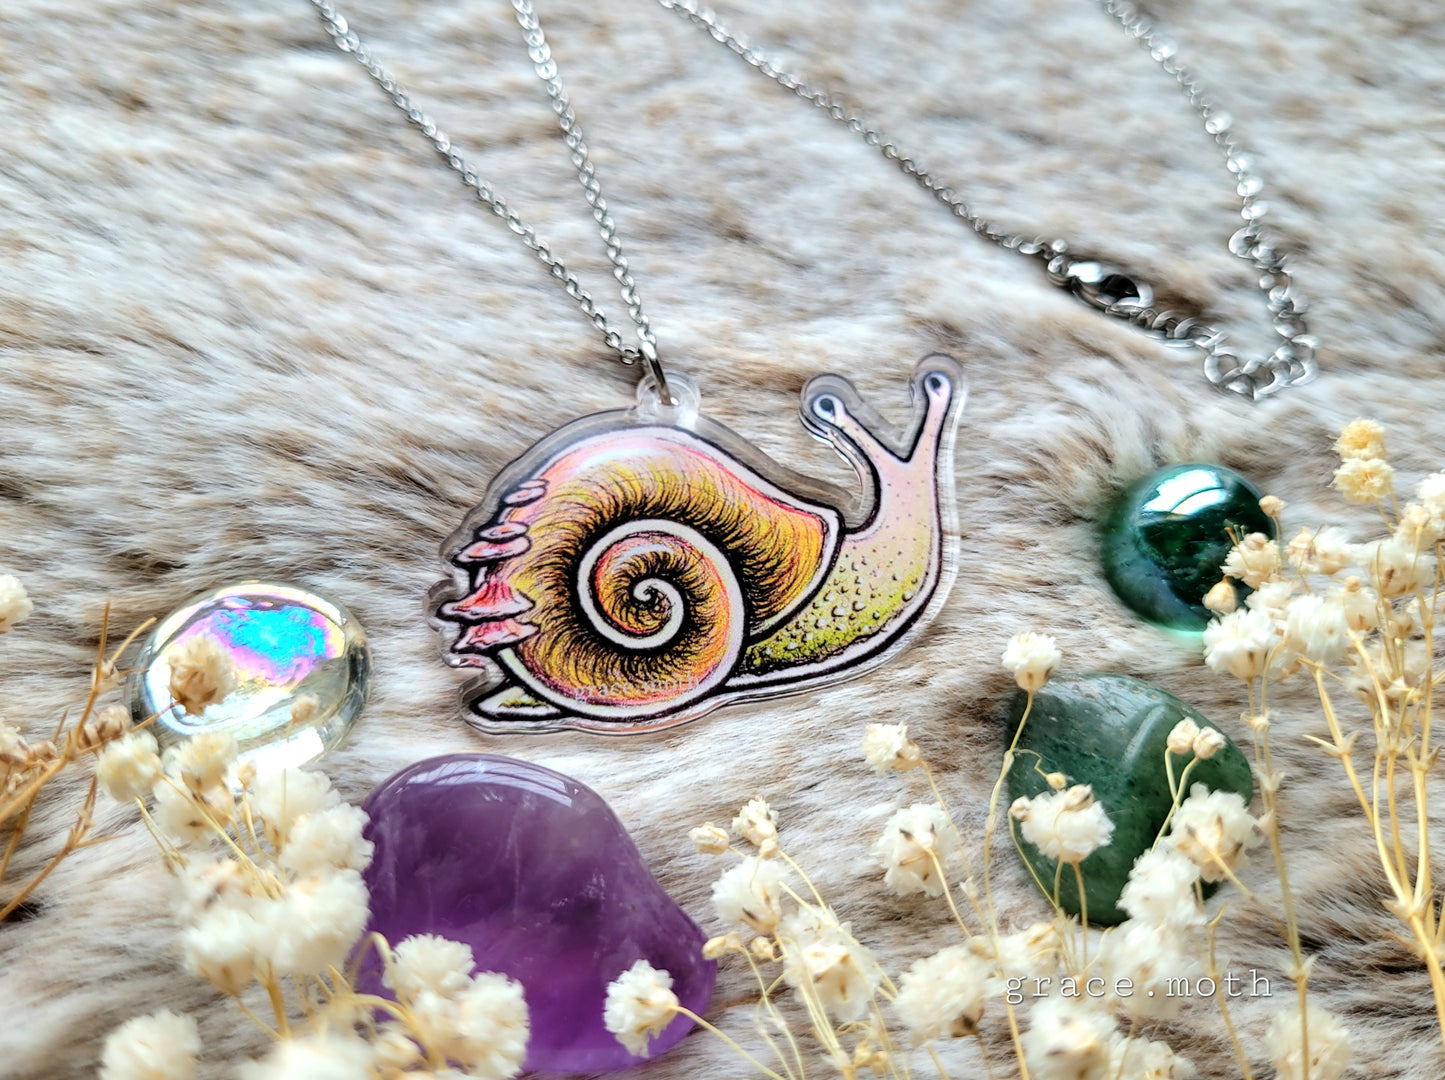 Cute Snail illustrated necklace, recycled acrylic, by Grace Moth